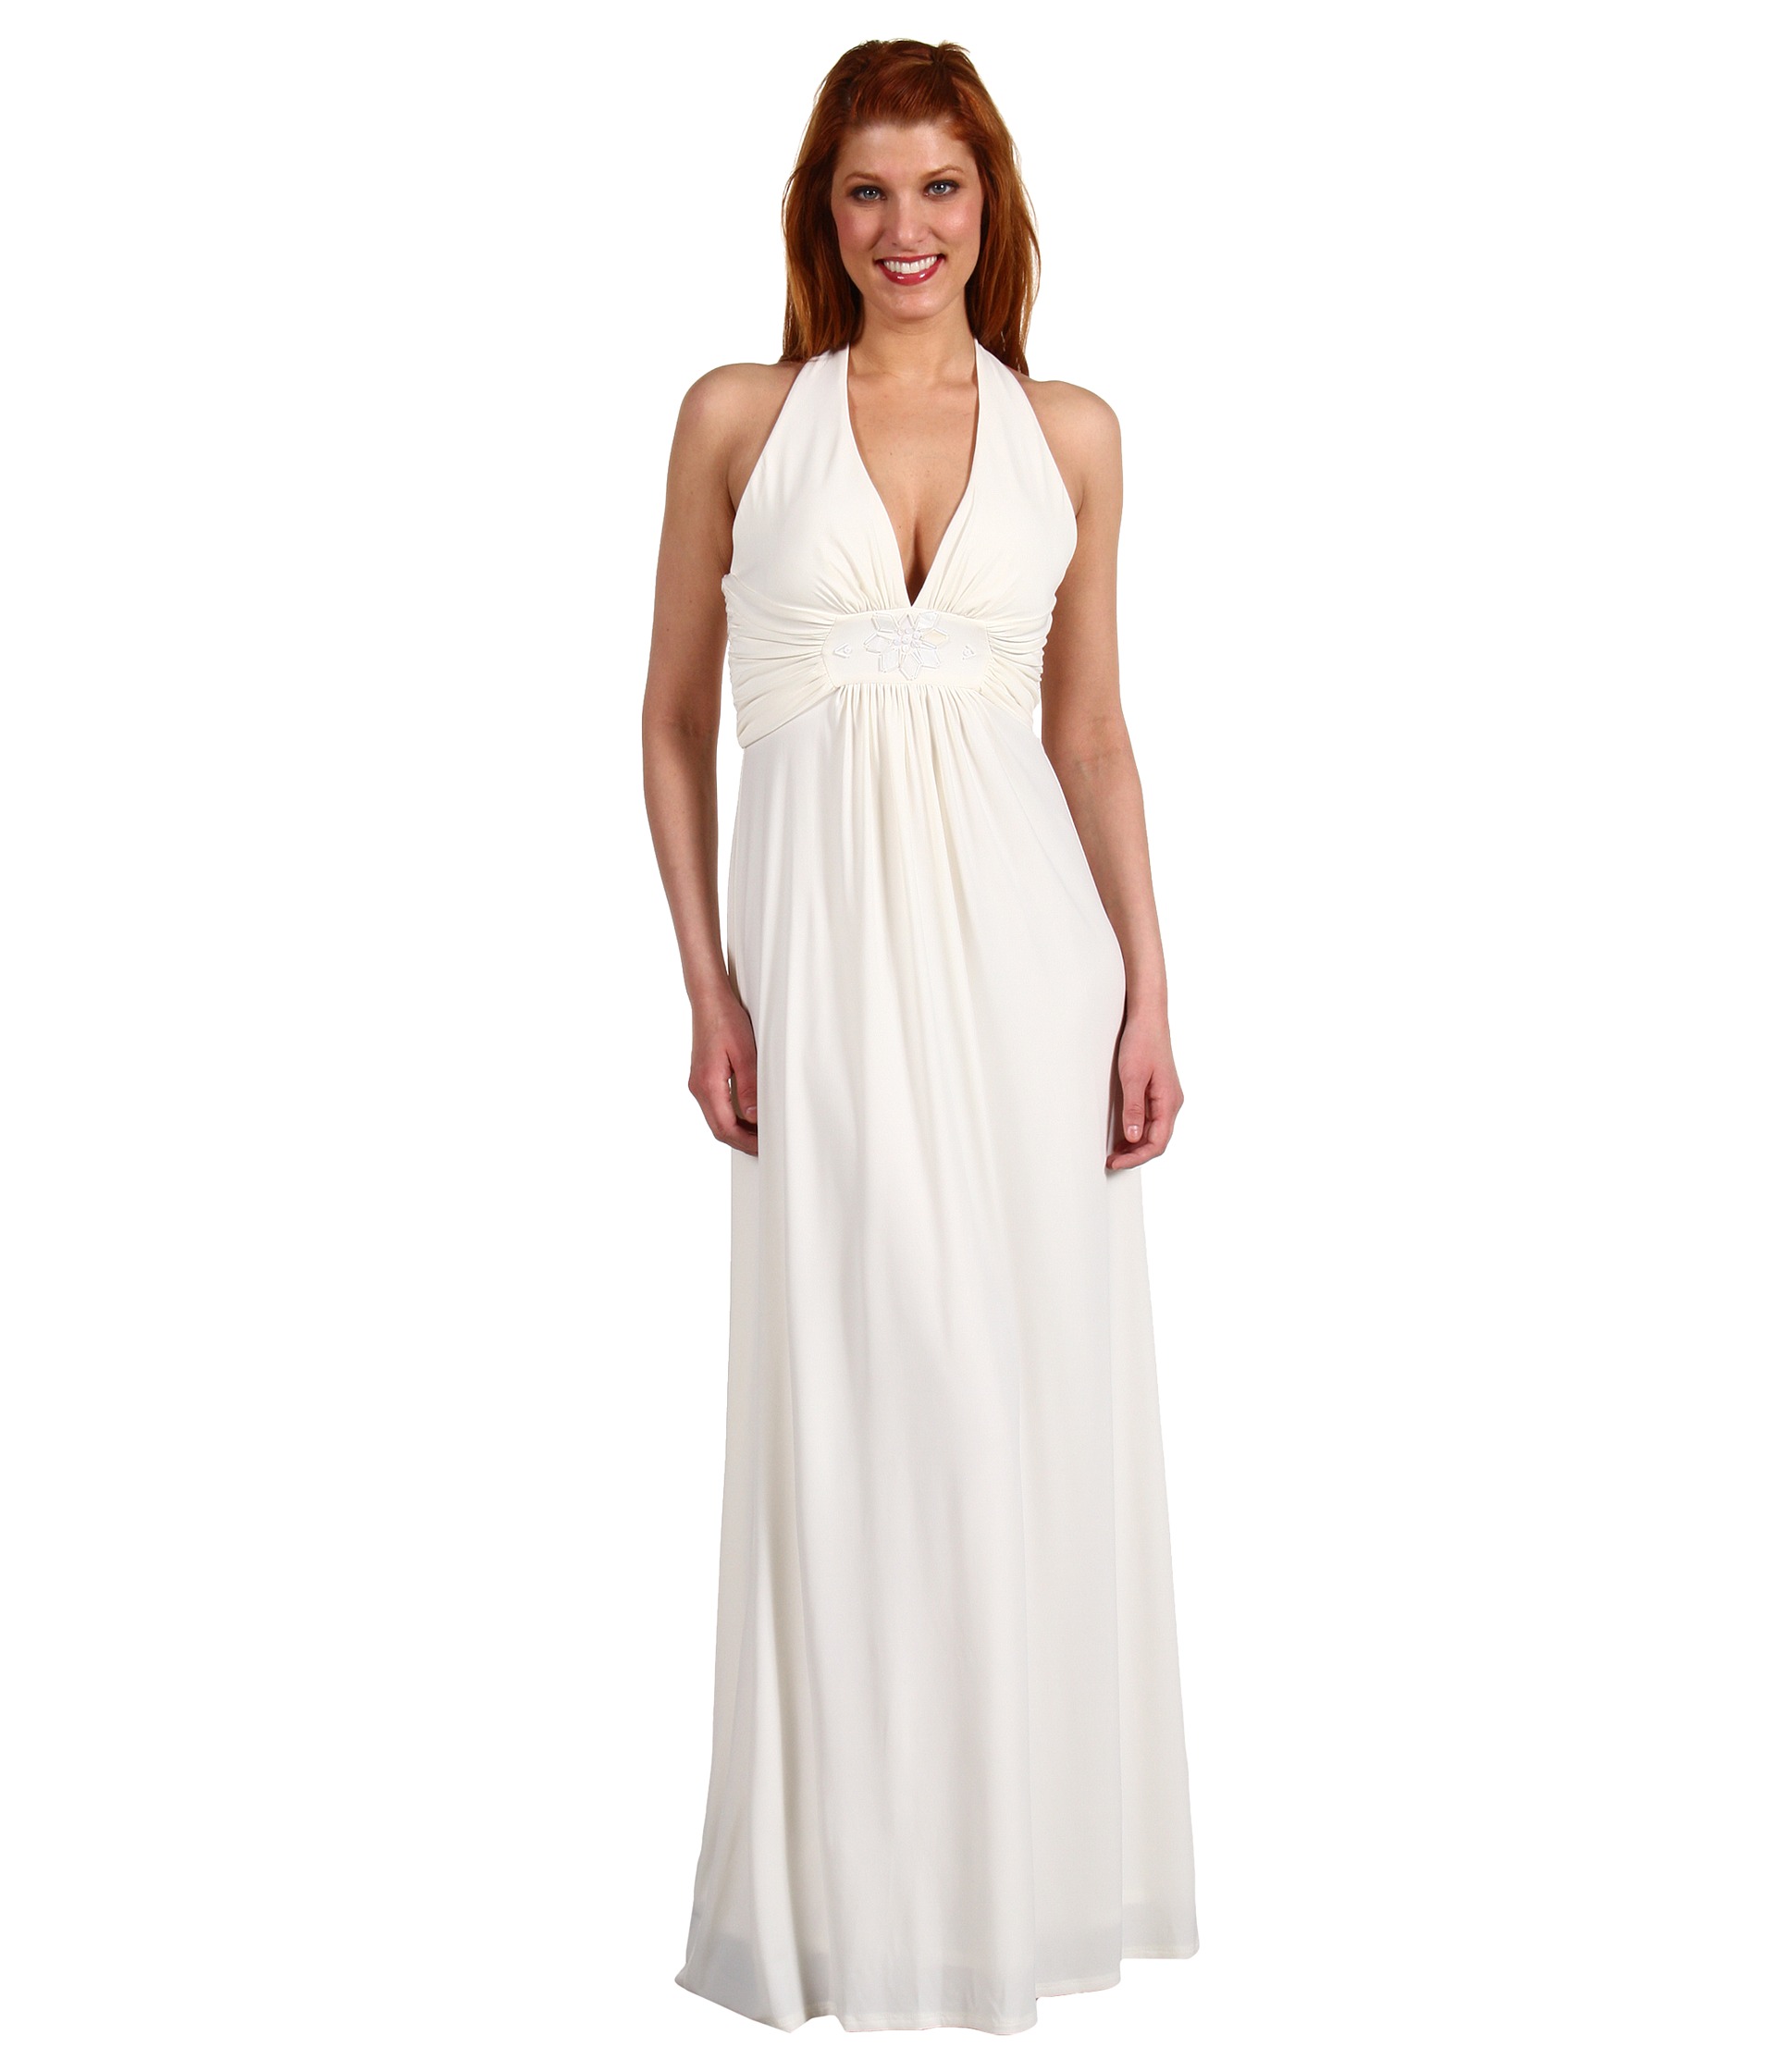 Max and Cleo Beaded Halter Dress $104.99 ( 38% off MSRP $168.00)